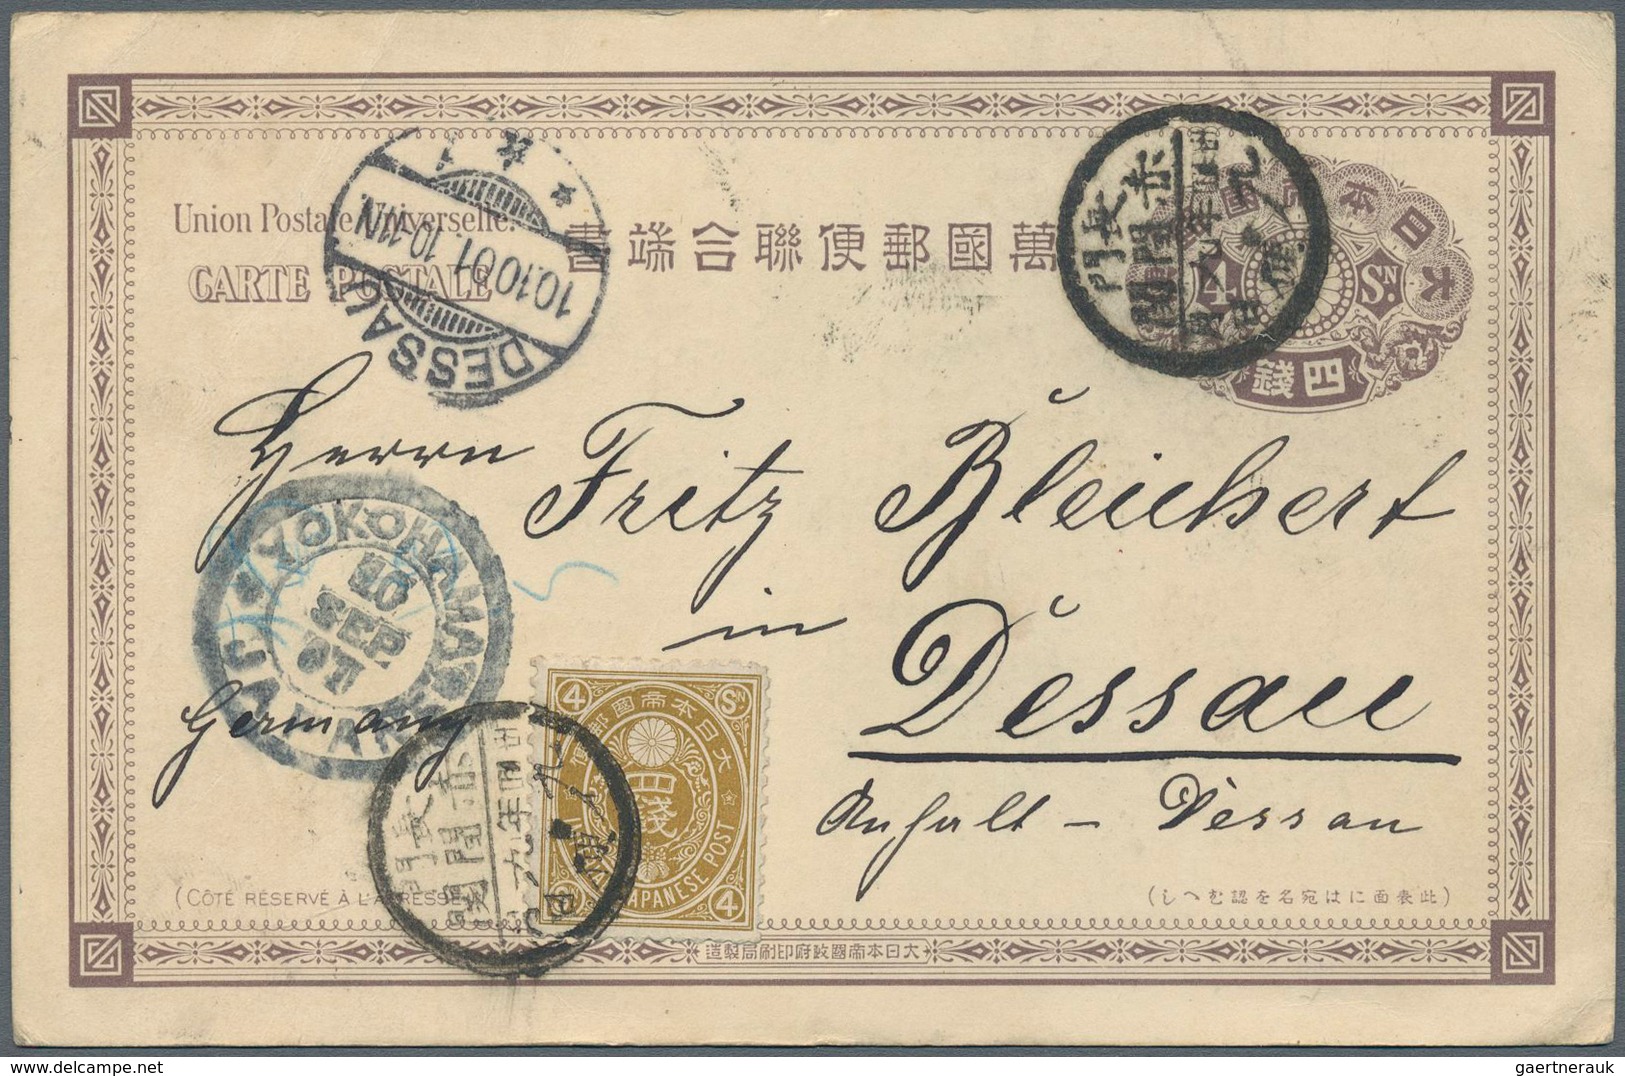 22956 Japan - Ganzsachen: 1874/1922, mint and used old-time collection. Inc. uprates, used foreign, severa